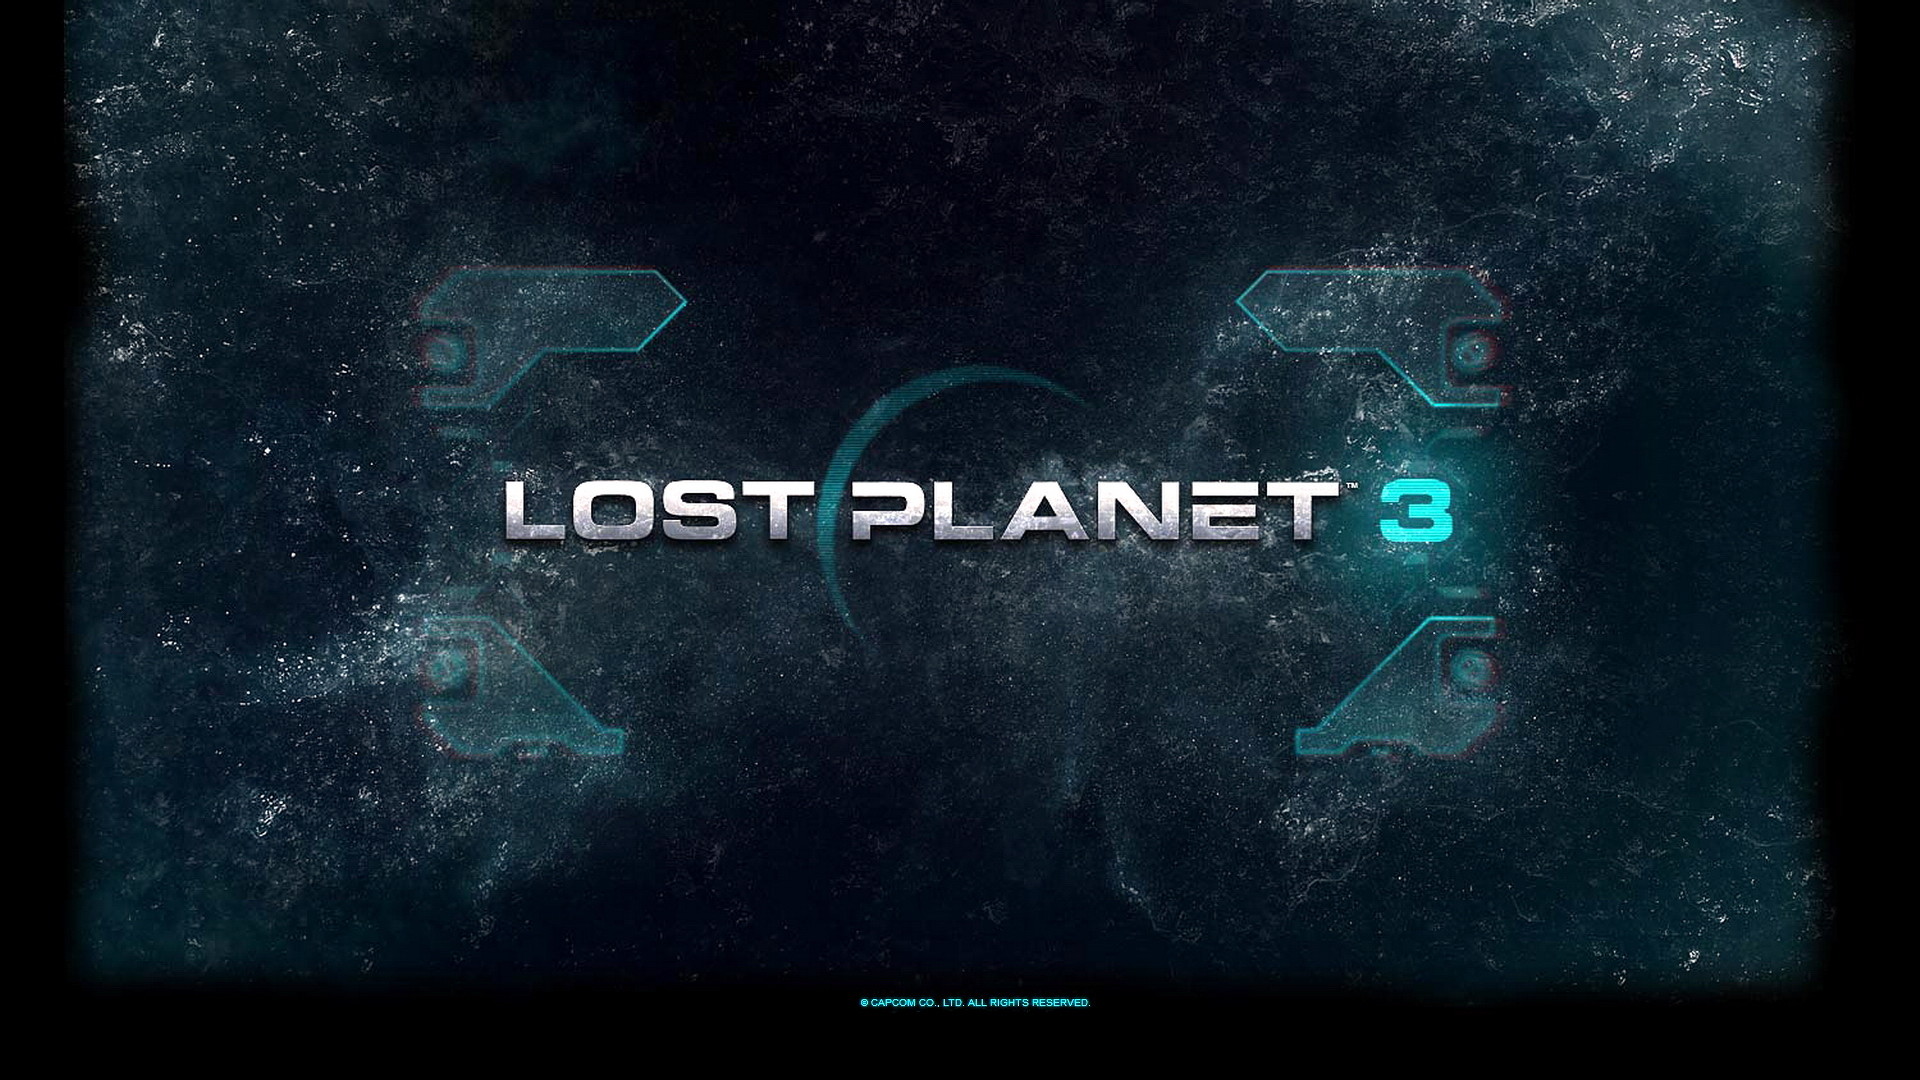 1920x1080 8 HD Lost Planet 3 Desktop Wallpapers For Free Download